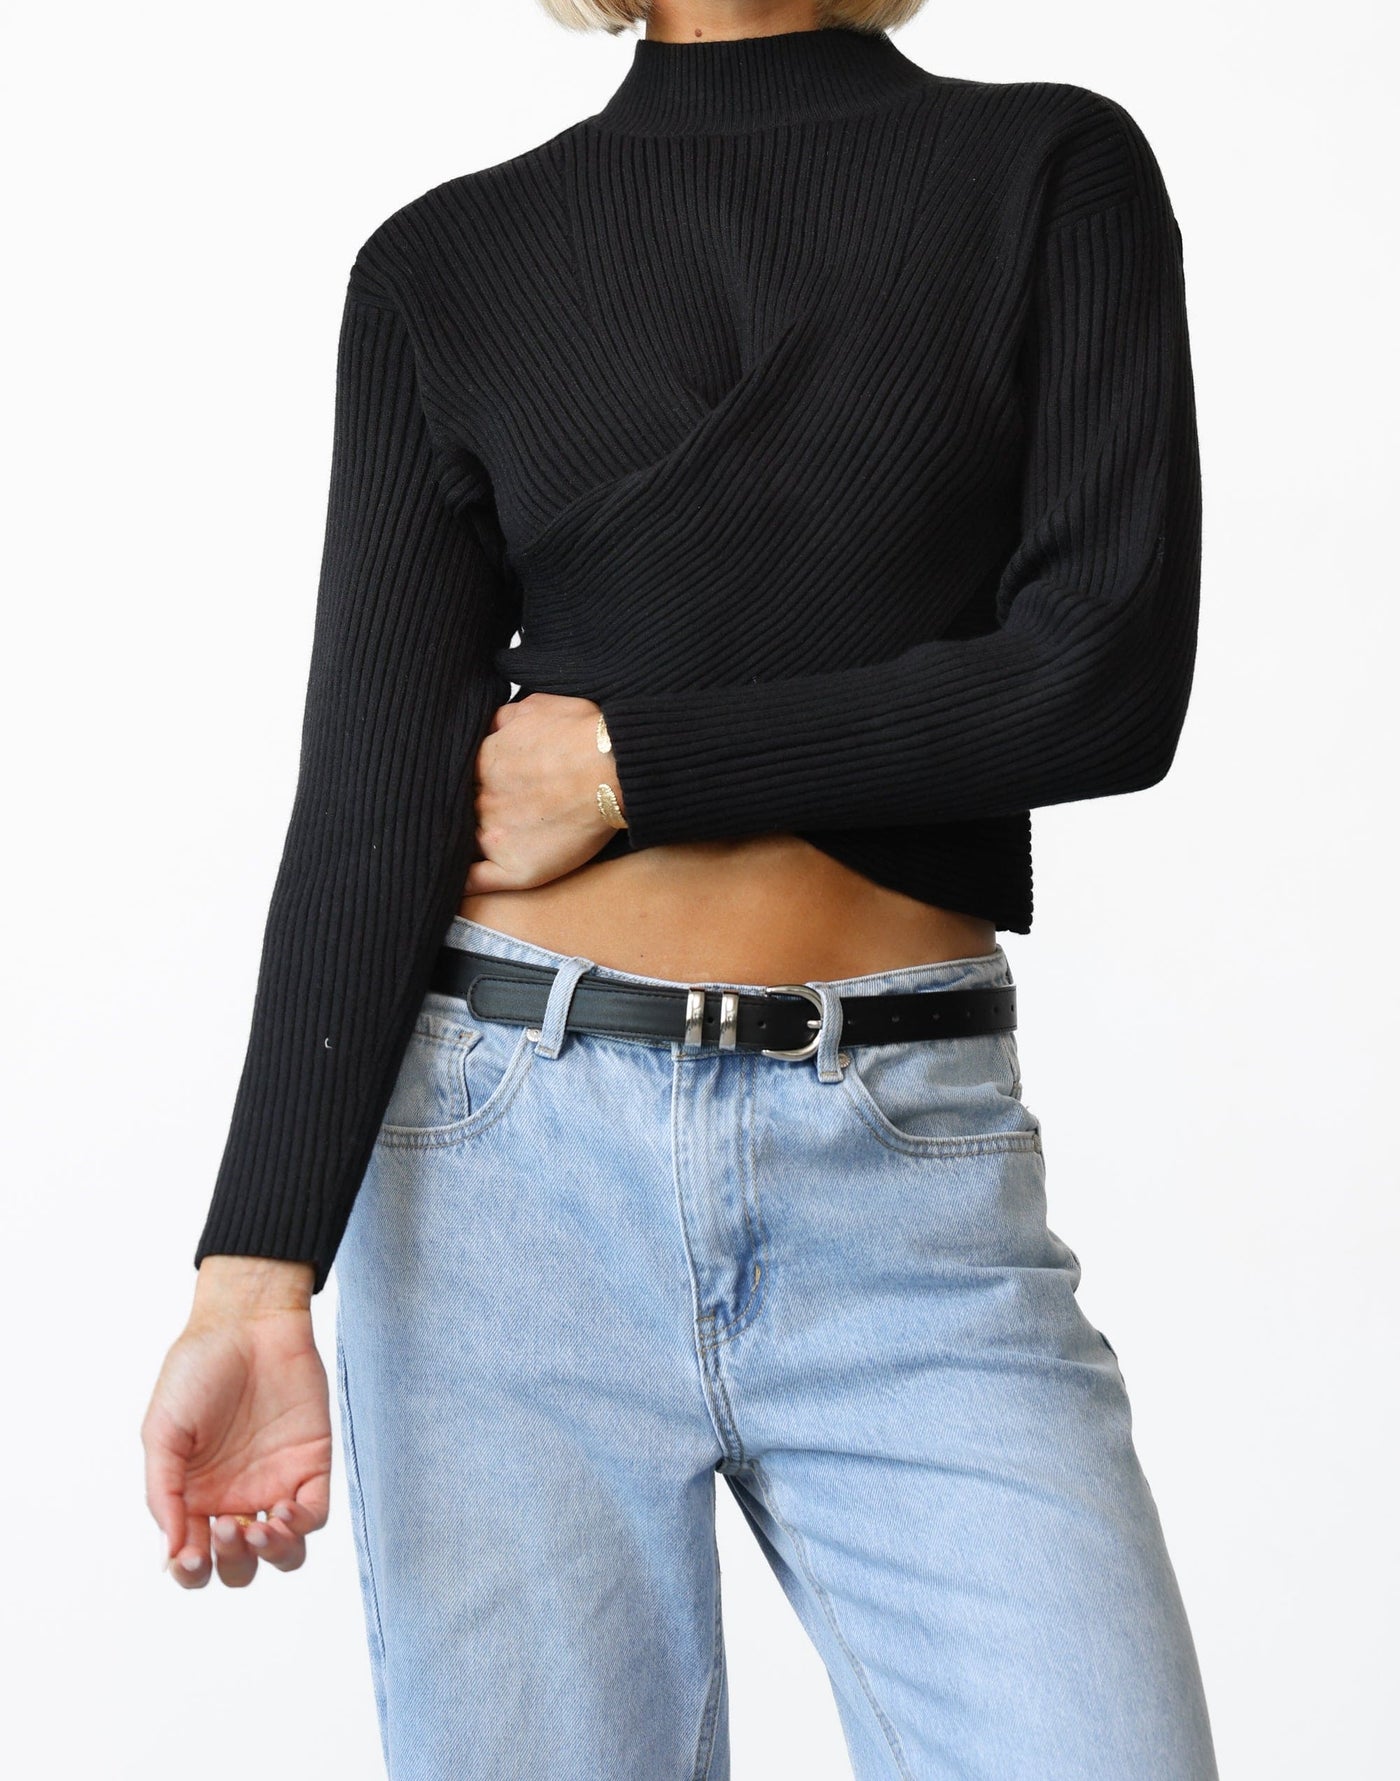 Naomie Jumper (Black) - Crossover High Neck Knit Jumper - Women's Top - Charcoal Clothing